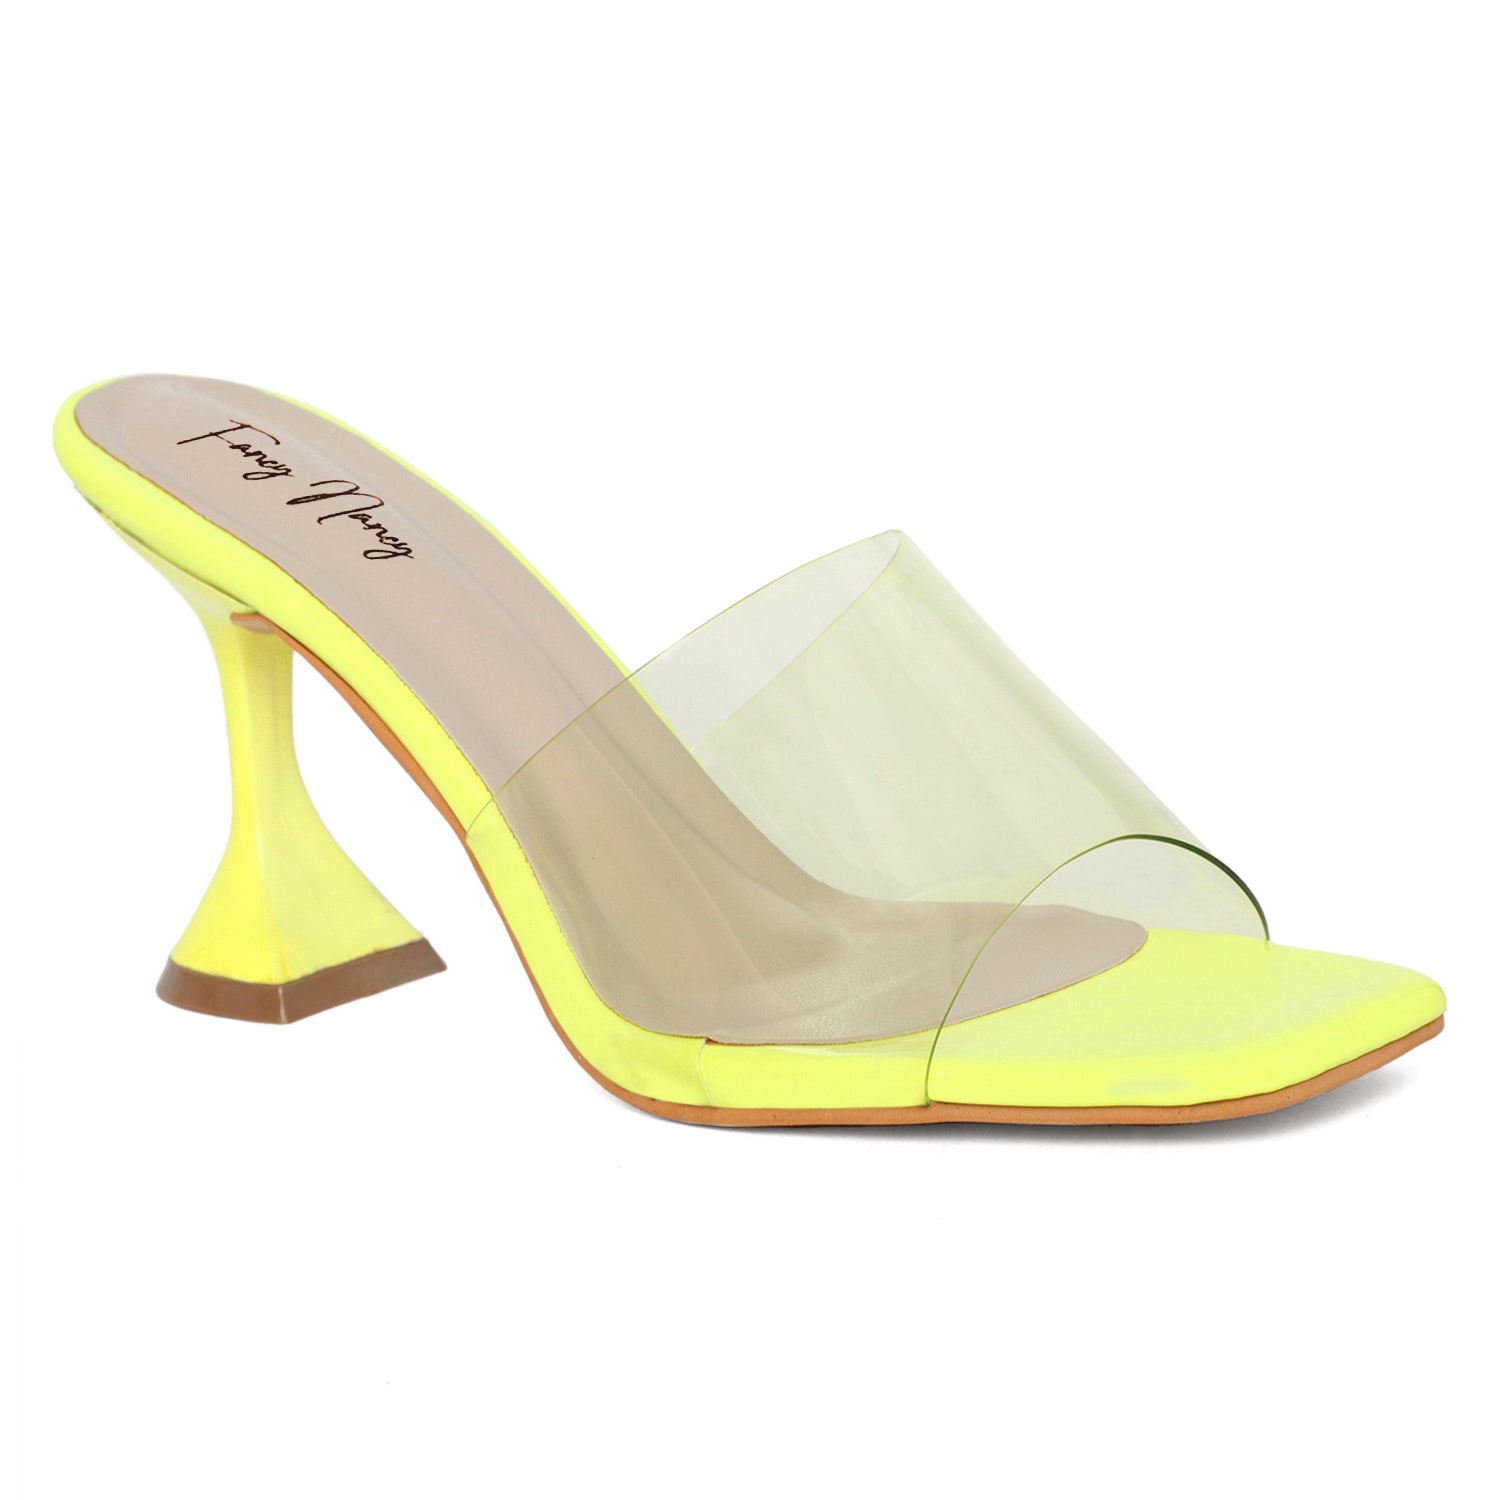 Neon Heels Collection New | up2step